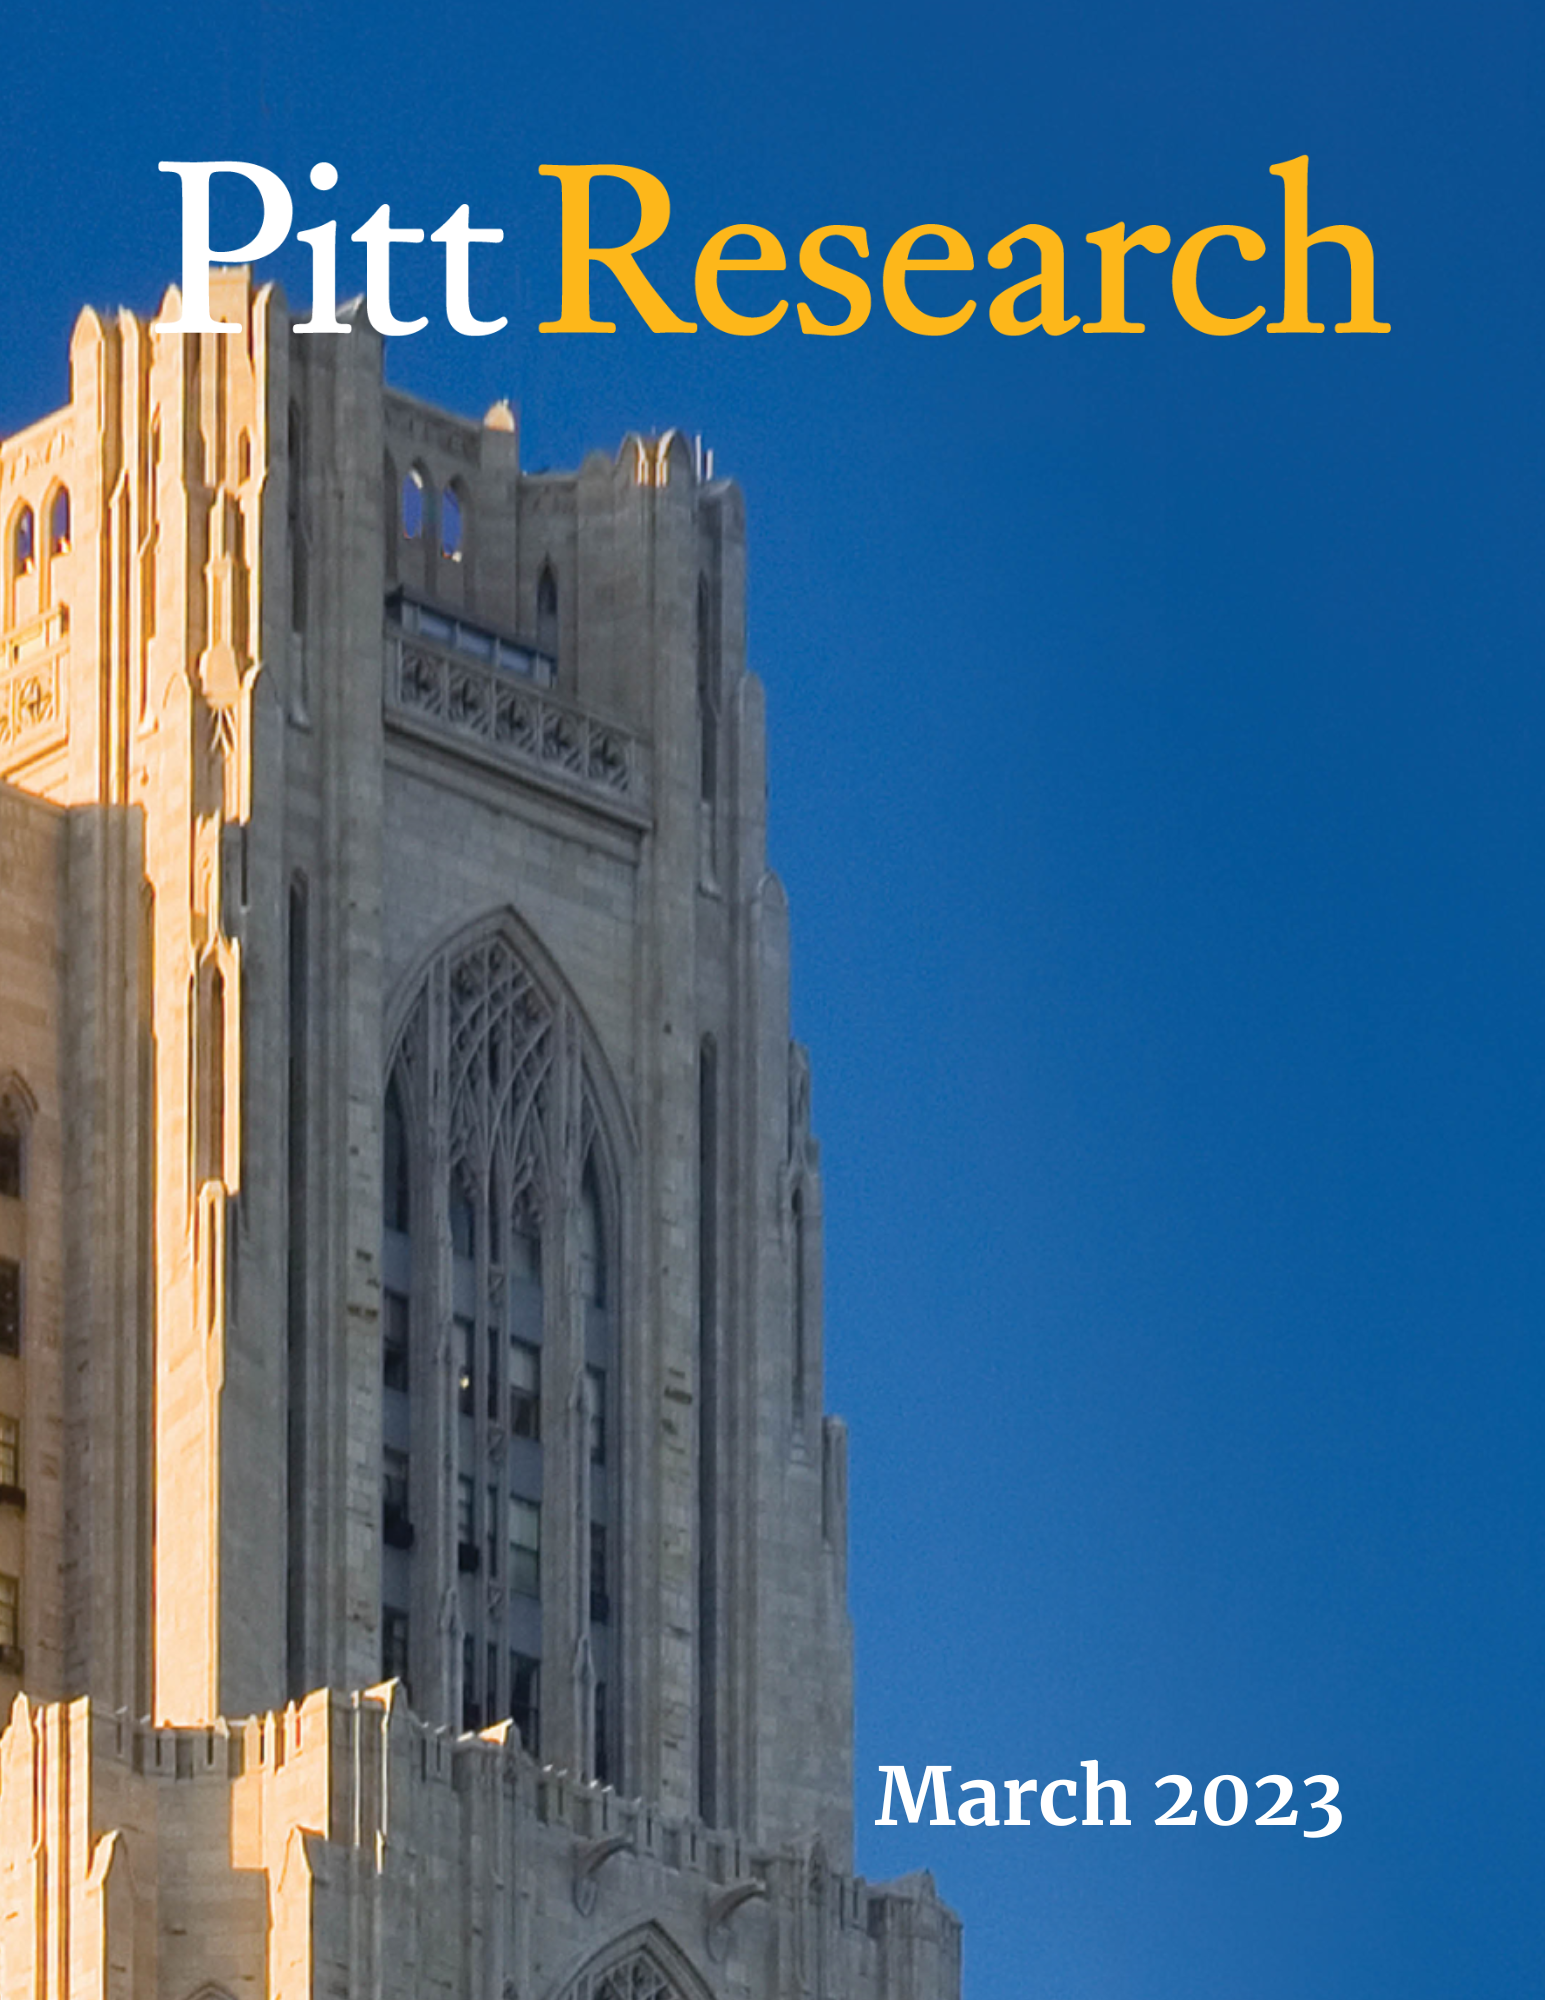 Pitt Research Newsletter for March 2023